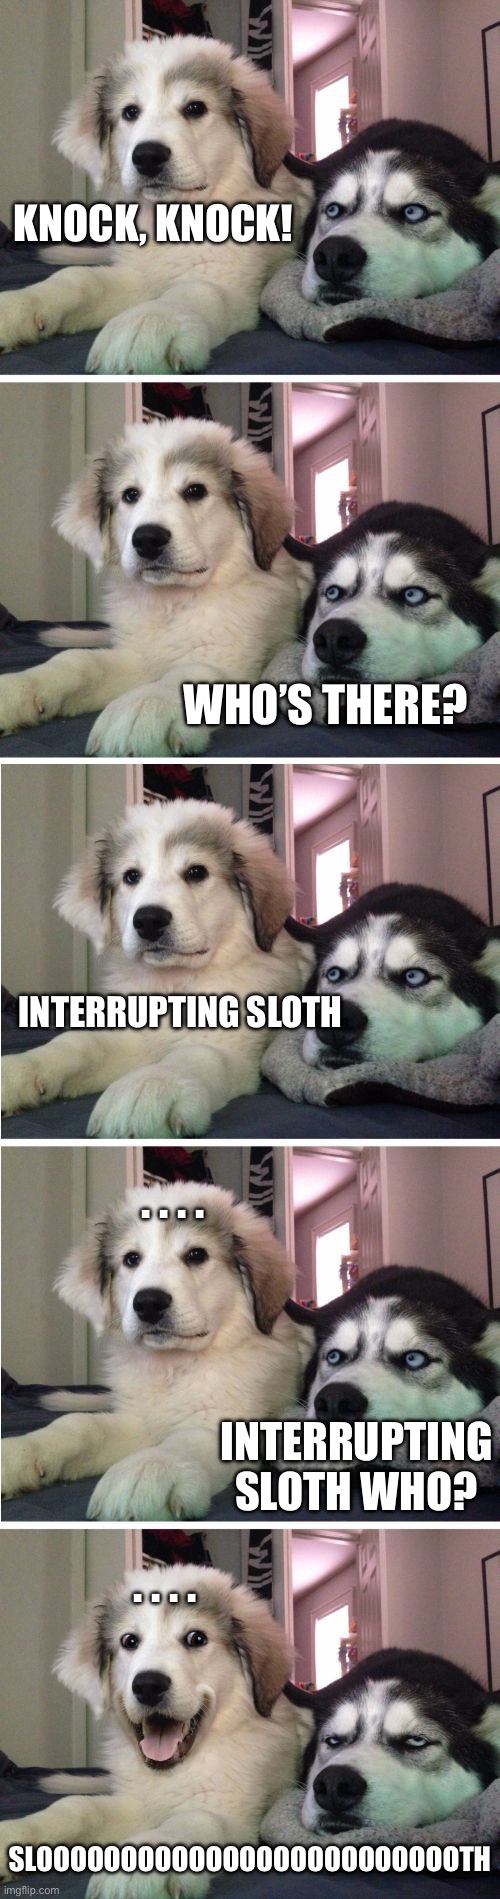 Knock Knock Dogs | KNOCK, KNOCK! WHO’S THERE? INTERRUPTING SLOTH; . . . . INTERRUPTING SLOTH WHO? . . . . SLOOOOOOOOOOOOOOOOOOOOOOOOOTH | image tagged in knock knock dogs | made w/ Imgflip meme maker